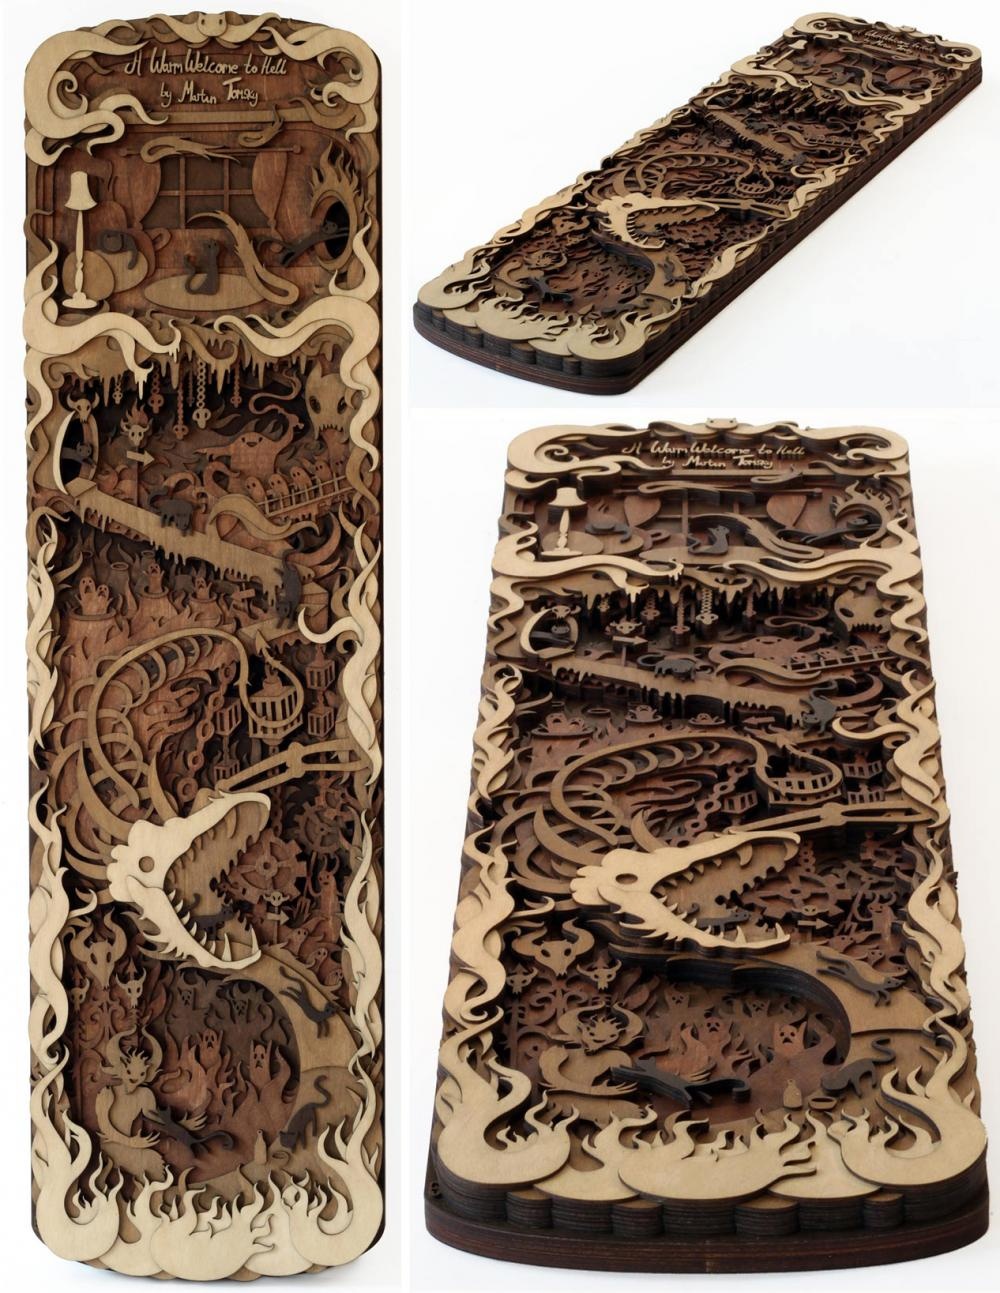 Technique for Layered Plywood Art from Layered Laser-cut Panel